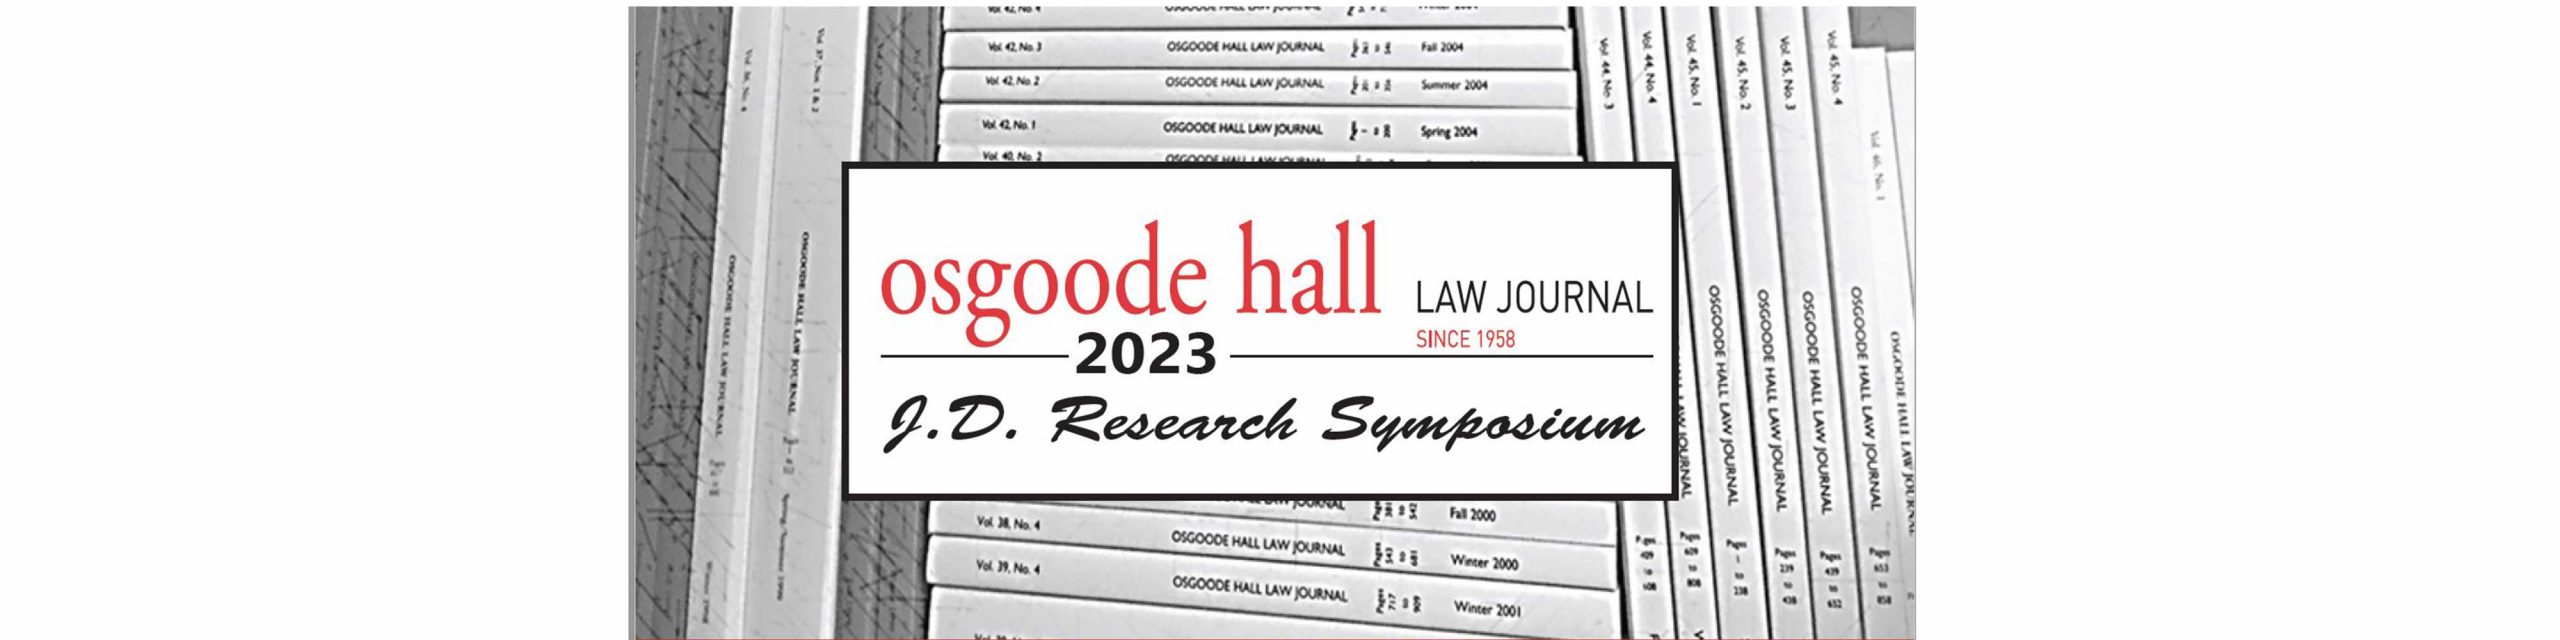 Law journal books behind text say Osgoode hall law Journal 2023 JD Research Symposium